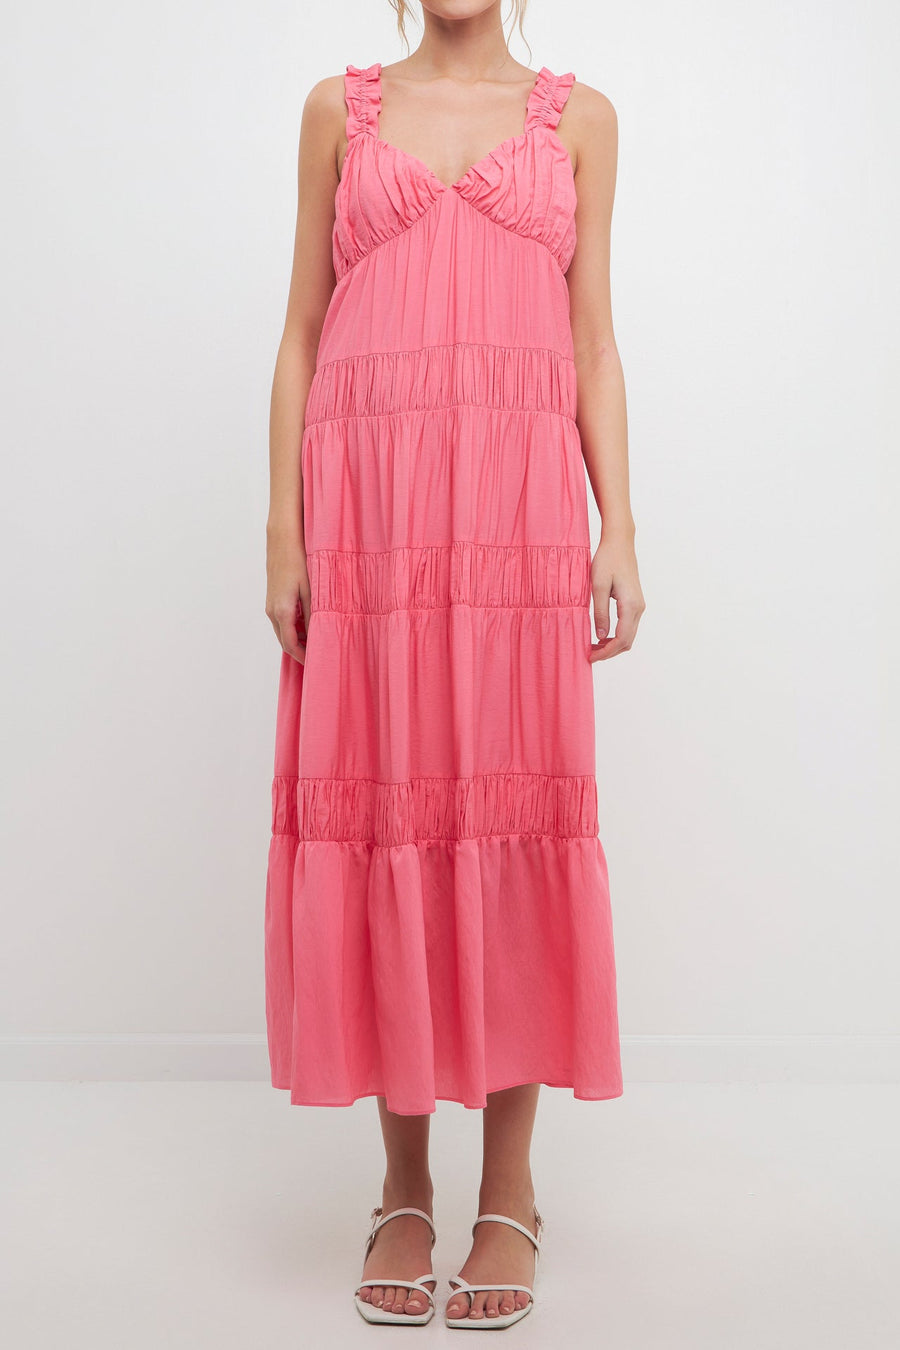 FREE THE ROSES-Ruched Layered Sweetheart Maxi Dress-DRESSES available at Objectrare